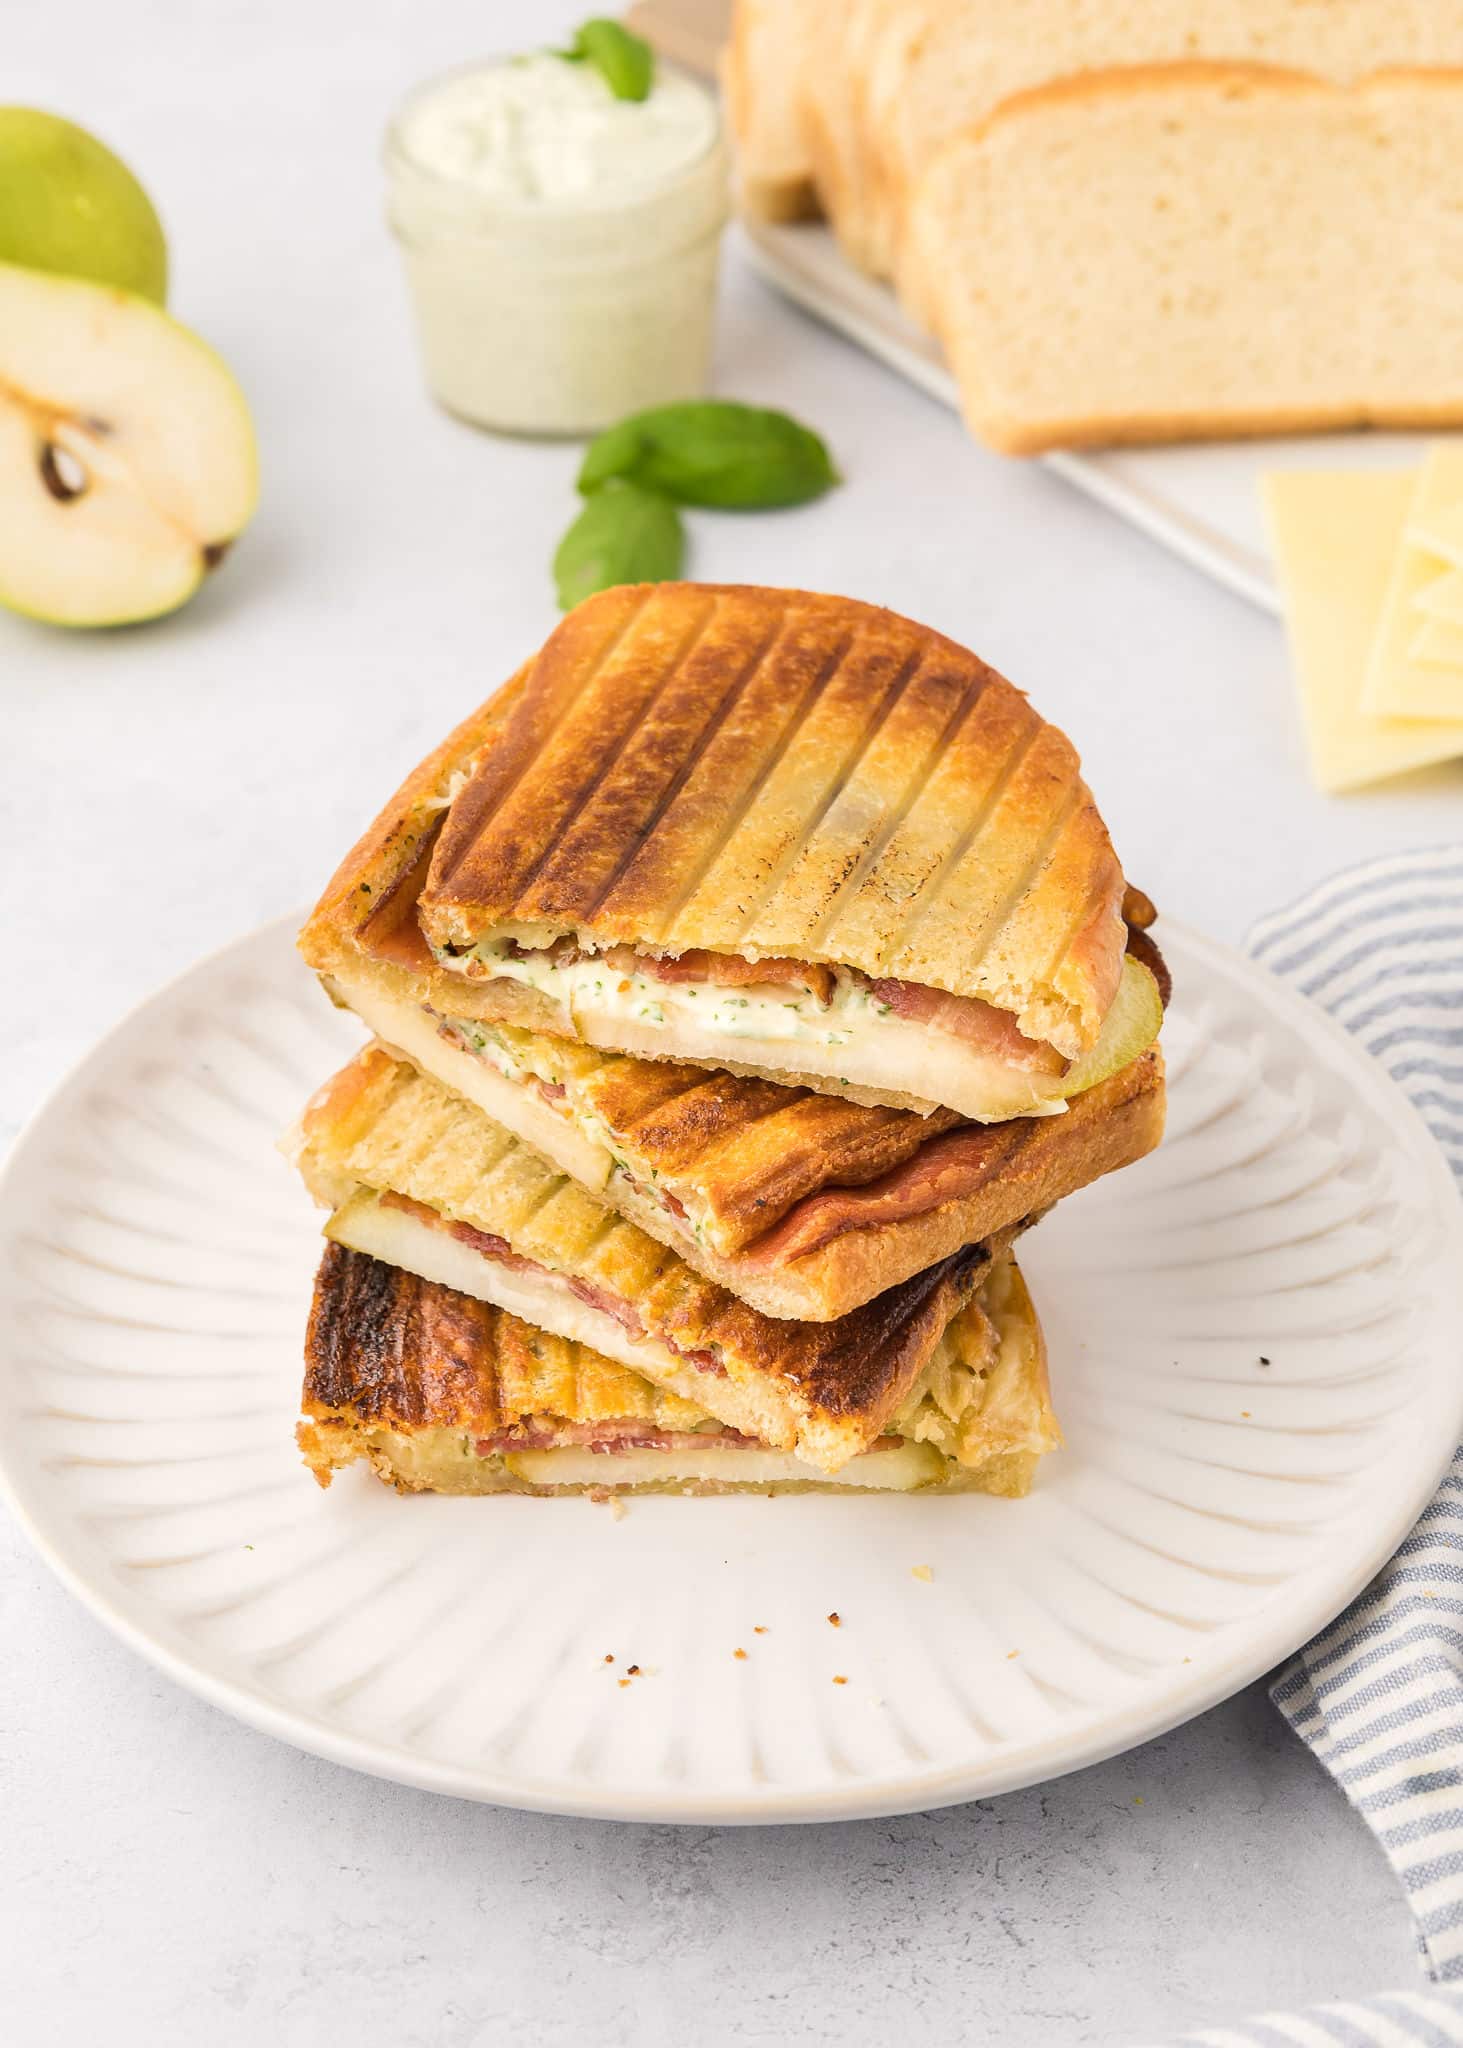 Pear and Bacon Panini with Basil Aioli (grilled cheese with pear and bacon)